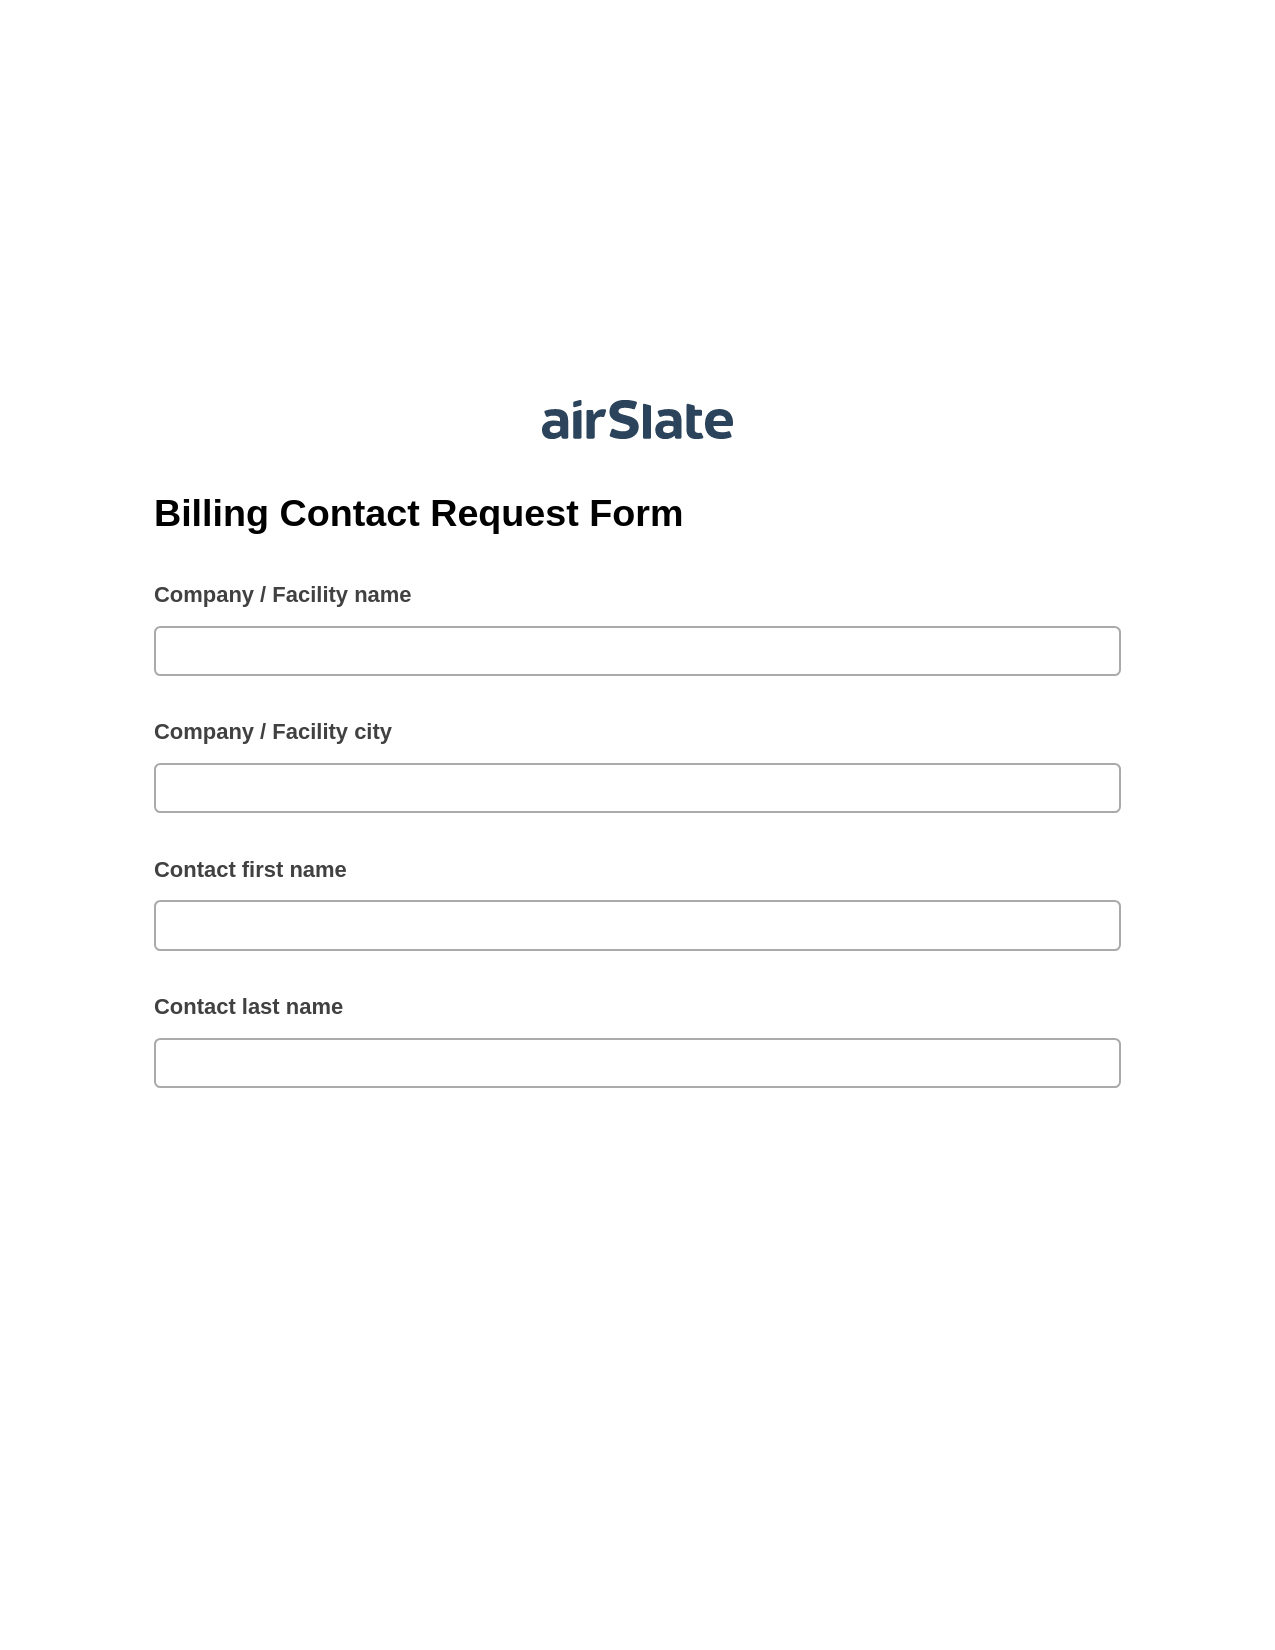 Multirole Billing Contact Request Form Pre-fill Dropdowns from MySQL Bot, Reminder Bot, Archive to SharePoint Folder Bot